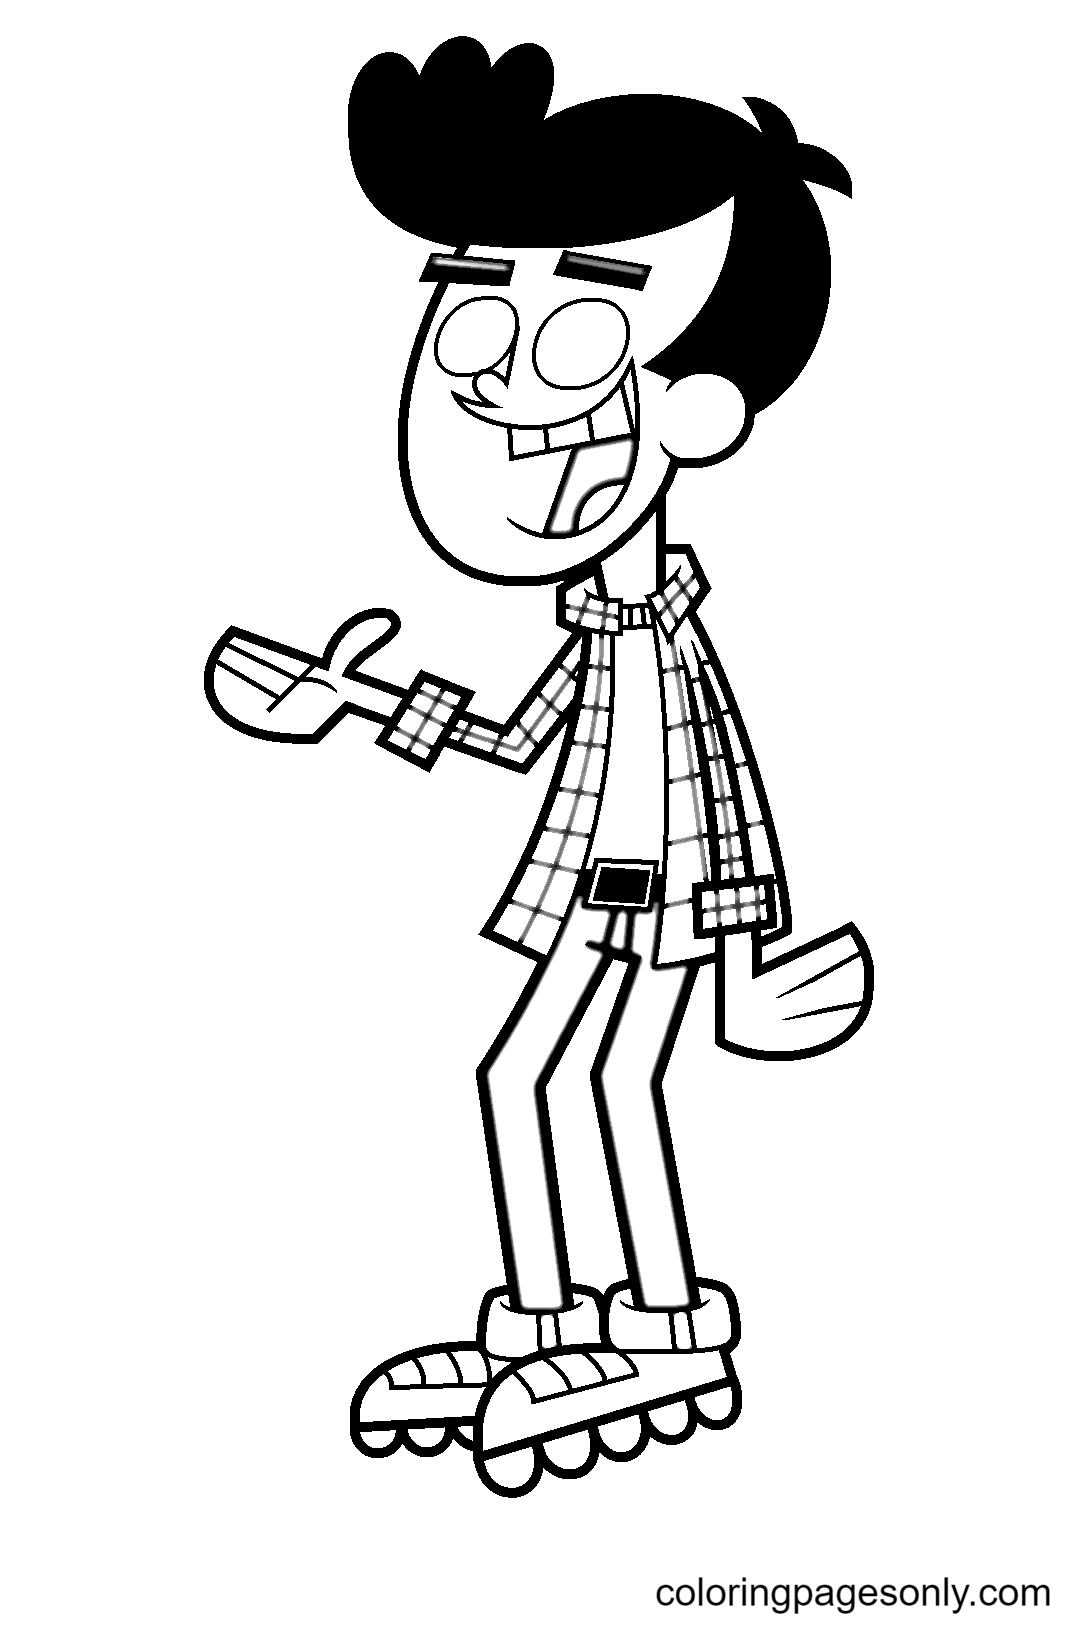 Bobby Santiago from The Loud House